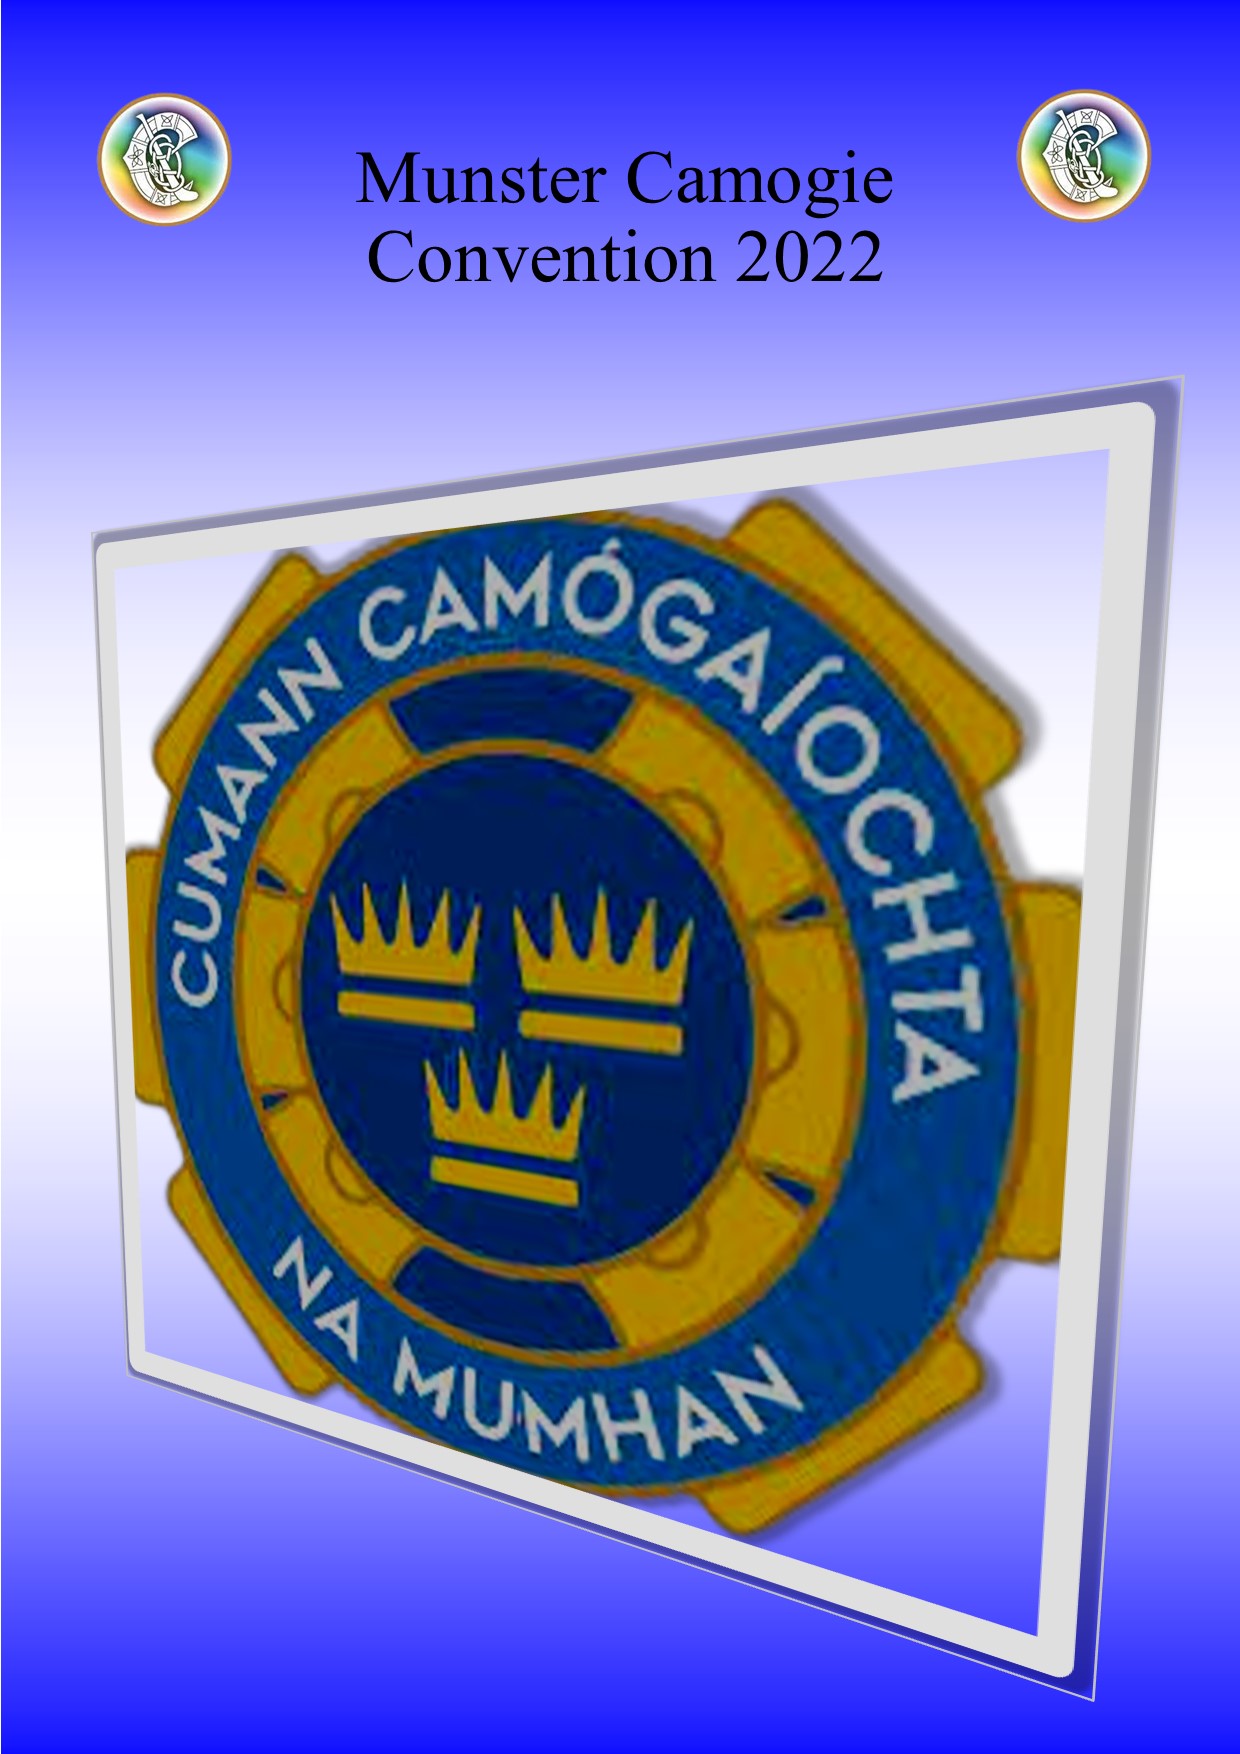 Munster Camogie Convention 2022